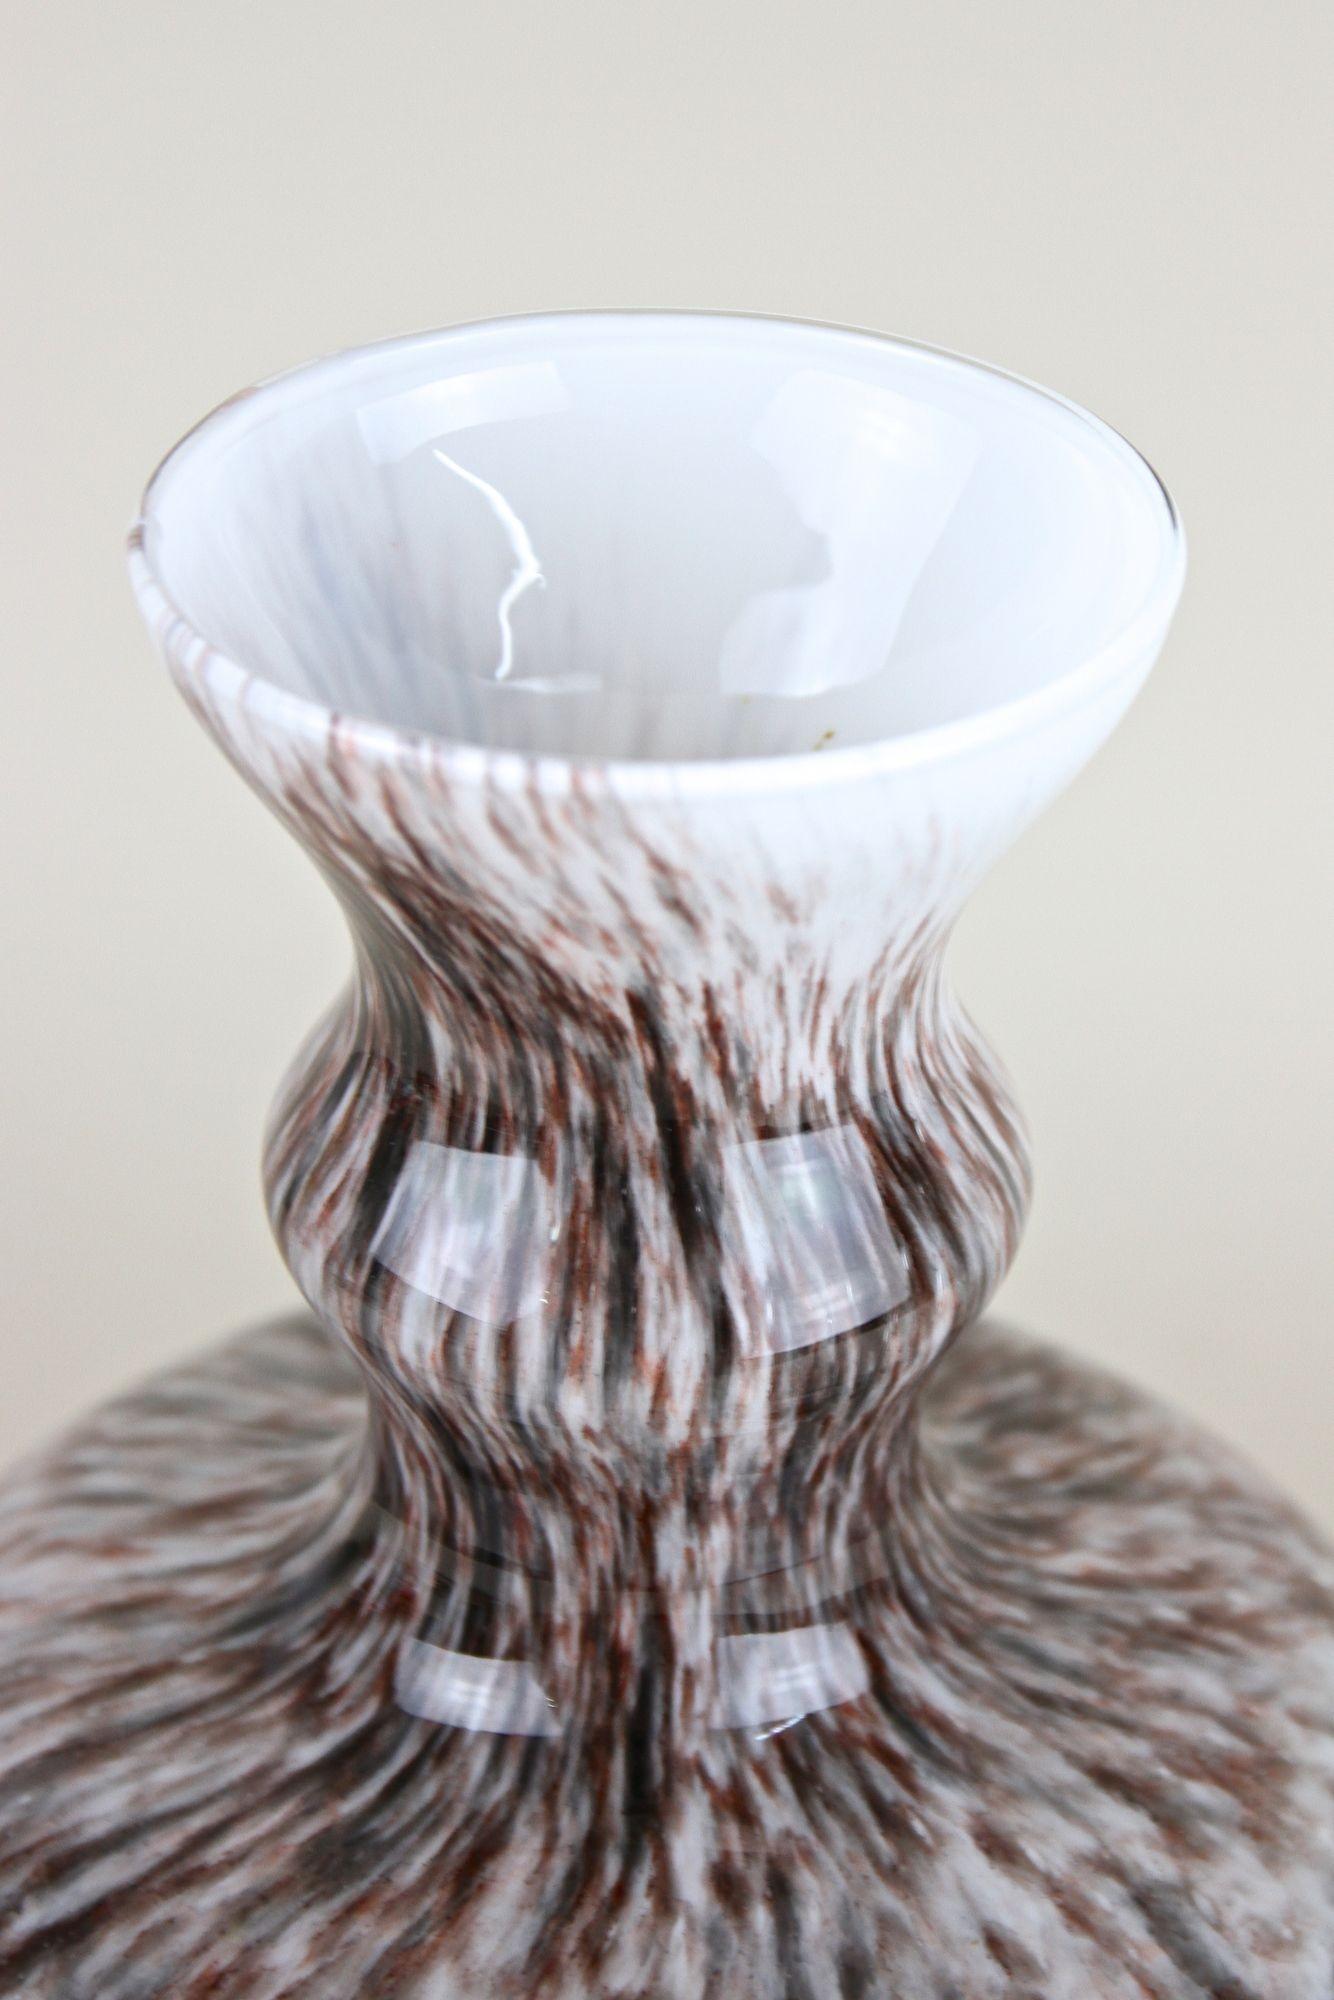 Bulbous Murano Glass Vase With Brown, Grey & Black Tones, Italy circa 1970 For Sale 2